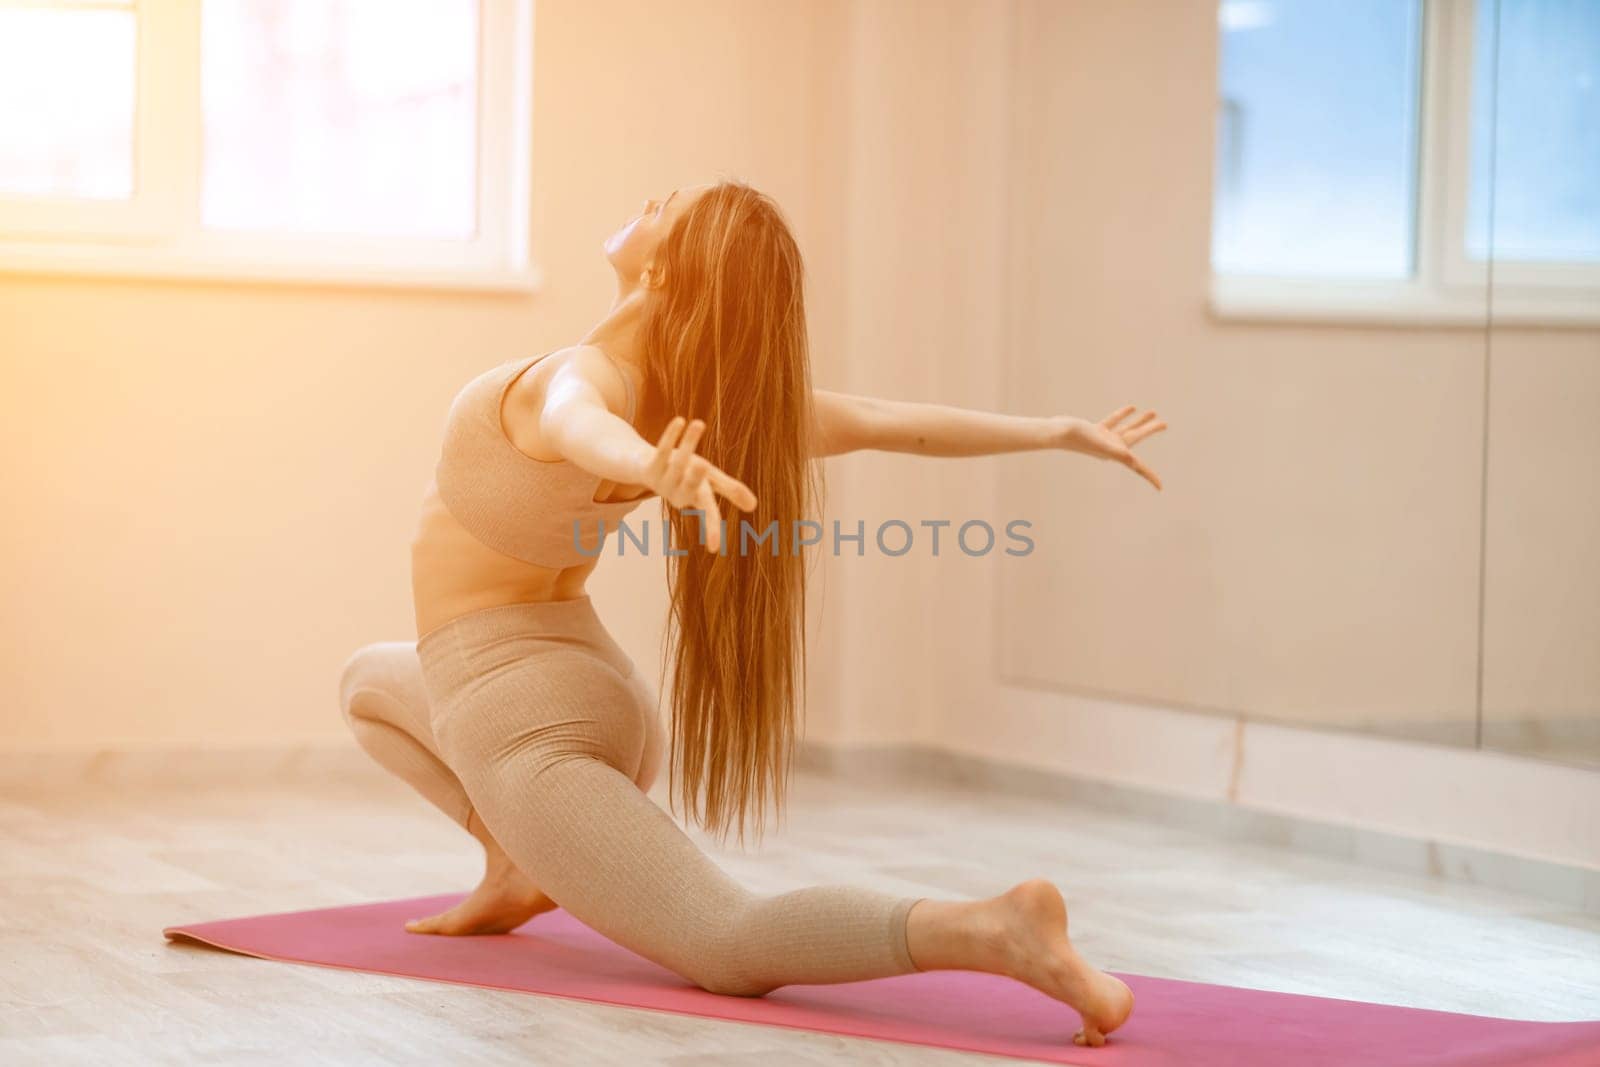 Girl does yoga. Young woman practices asanas on a beige one ton background